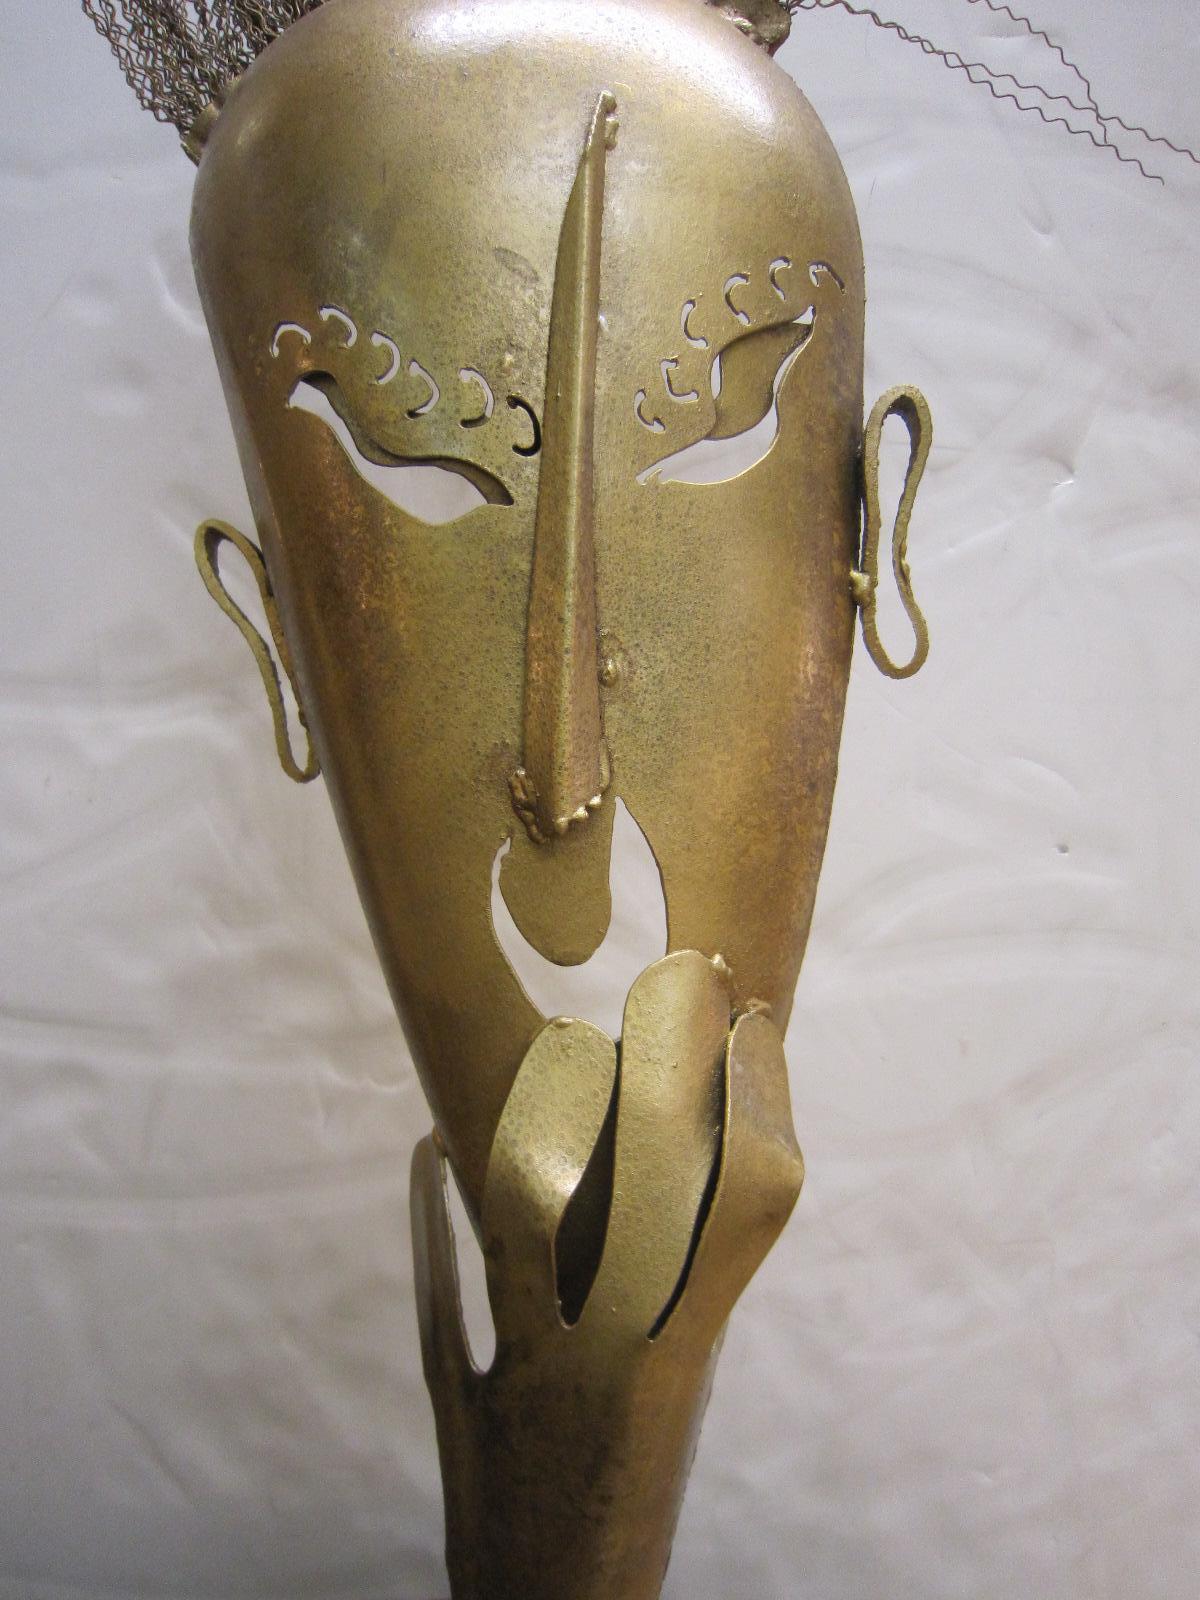 A large steel statue of a hand cut figural mask with lively wire hair in a mottled dark antique gold / brass painted finish with a slightly textured surface.
Wiener Werkstatte, Hagenauer style with decorative eyelashes, exotic shaped eye cut-outs,